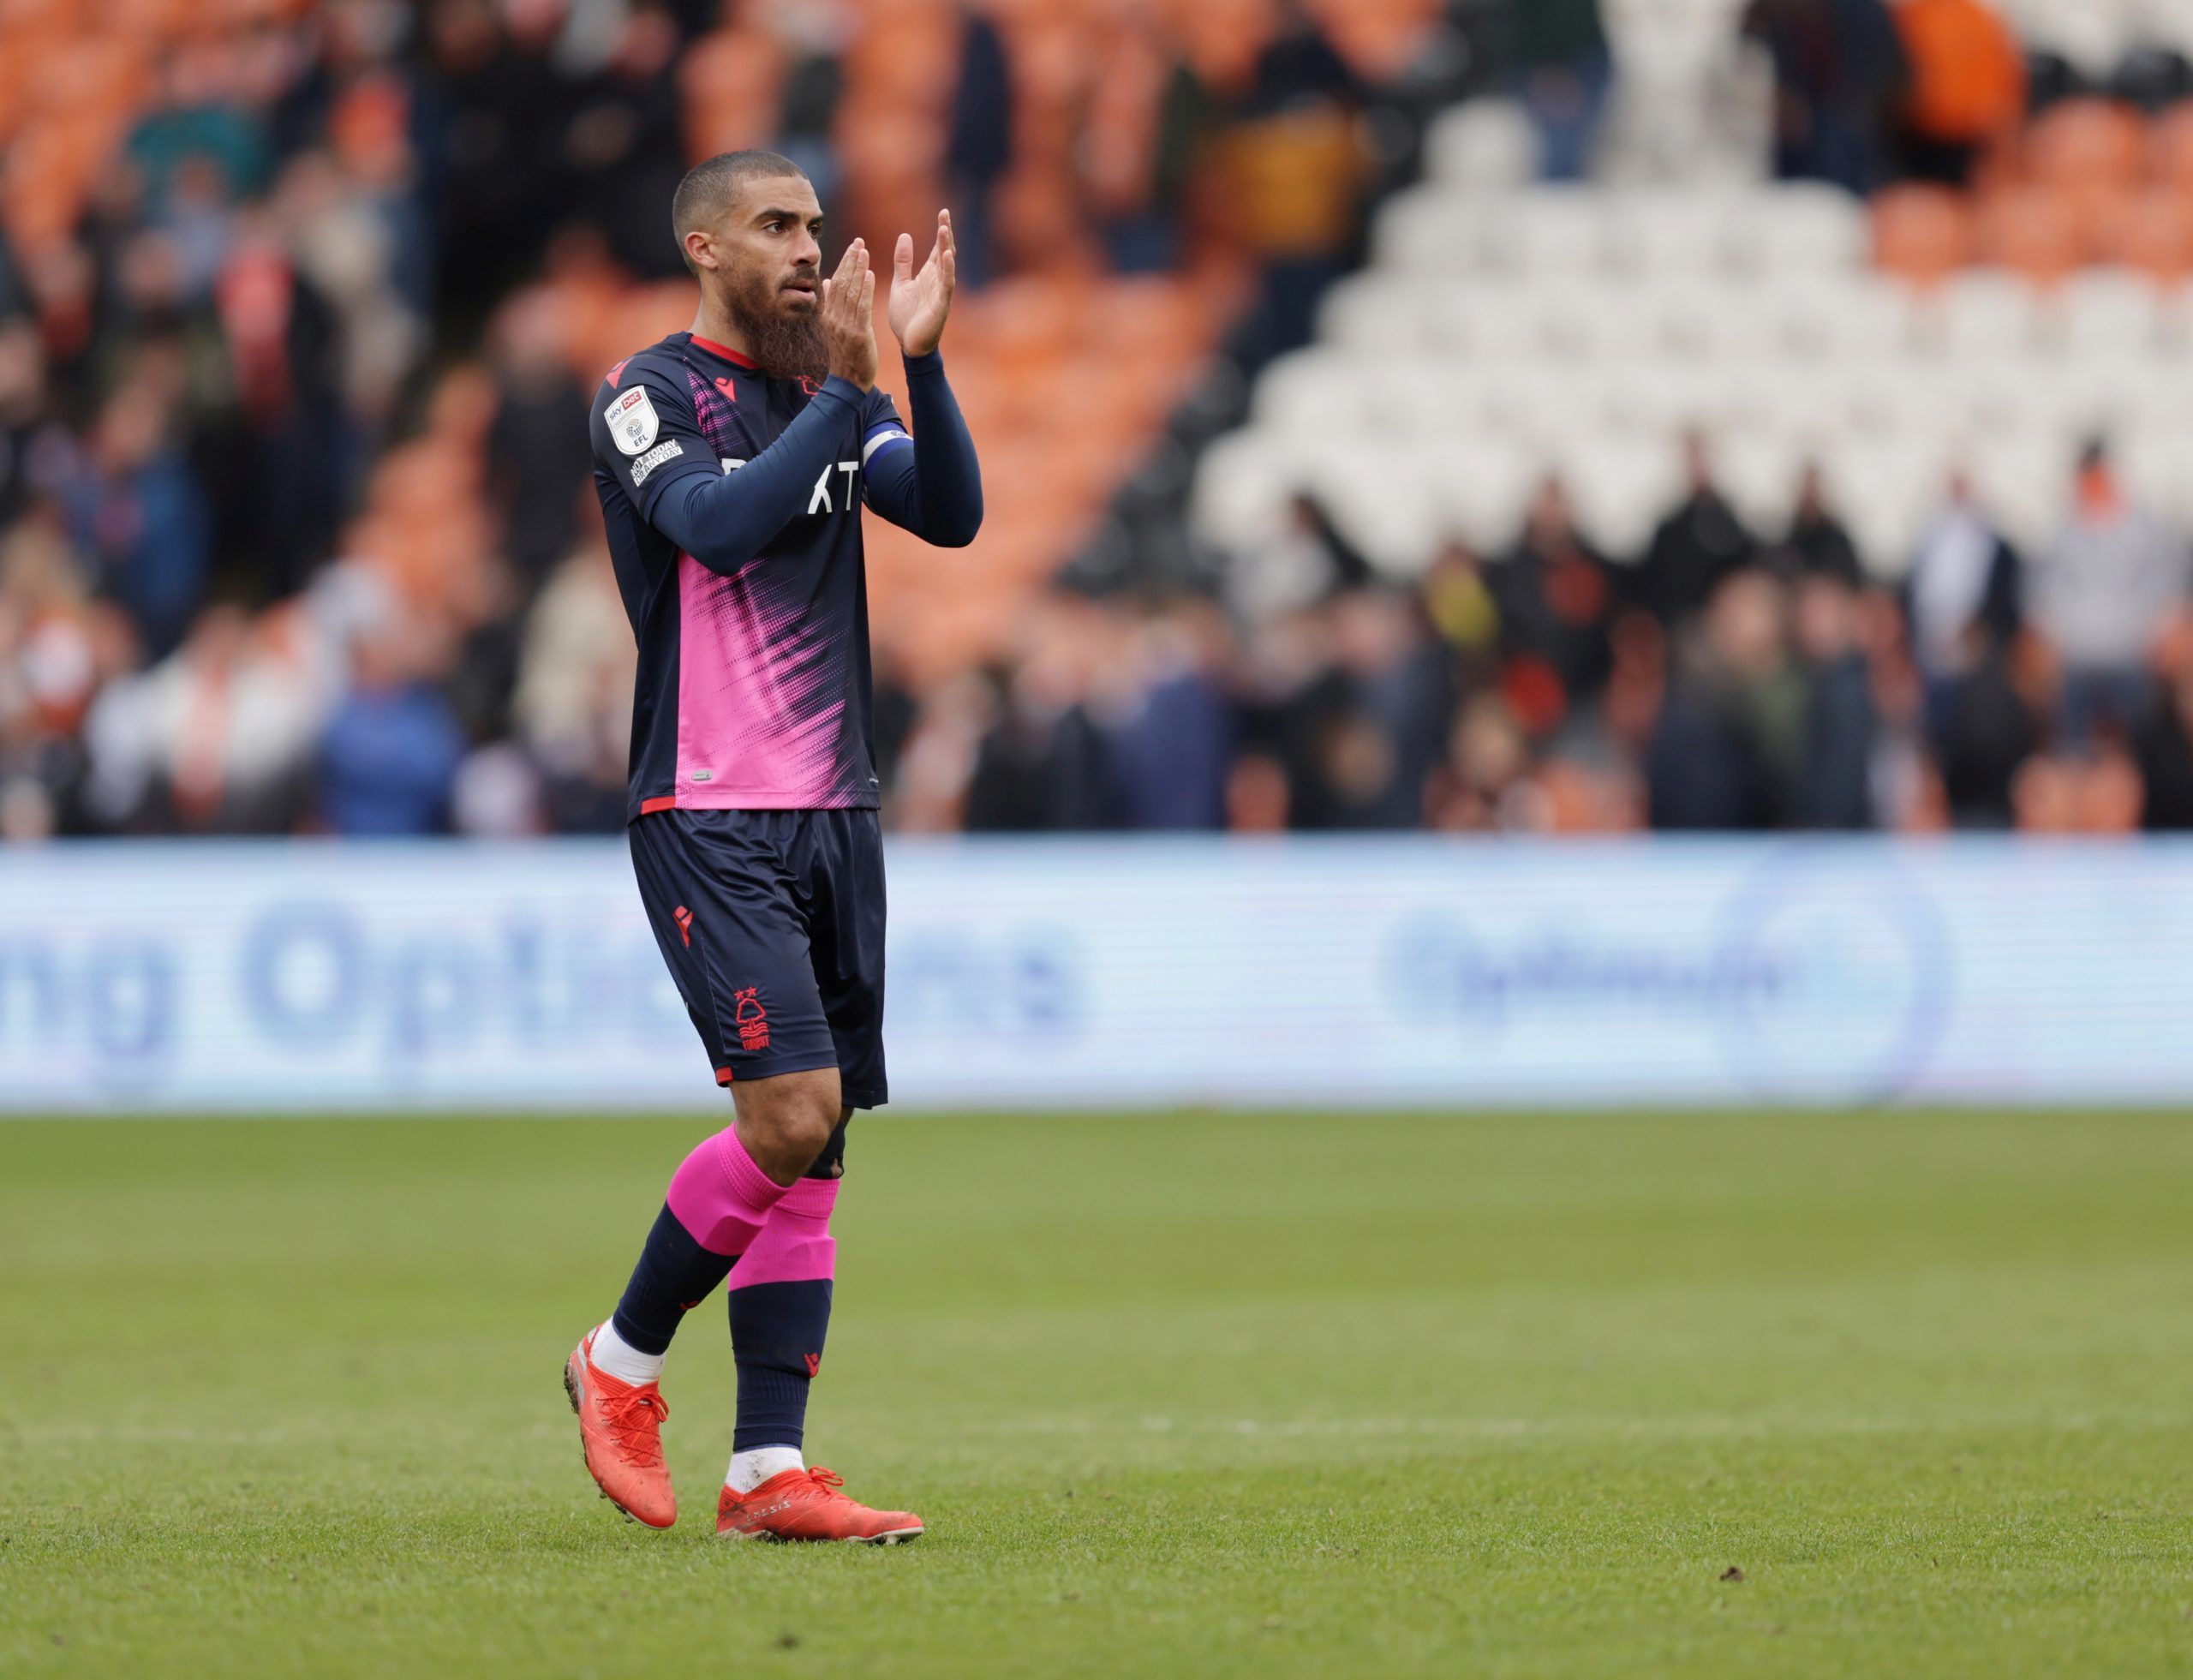 Soccer Football - Championship - Blackpool v Nottingham Forest - Bloomfield Road, Blackpool, Britain - April 2, 2022 Nottingham Forest's Lewis Grabban applauds fans after the match     Action Images/John Clifton  EDITORIAL USE ONLY. No use with unauthorized audio, video, data, fixture lists, club/league logos or 